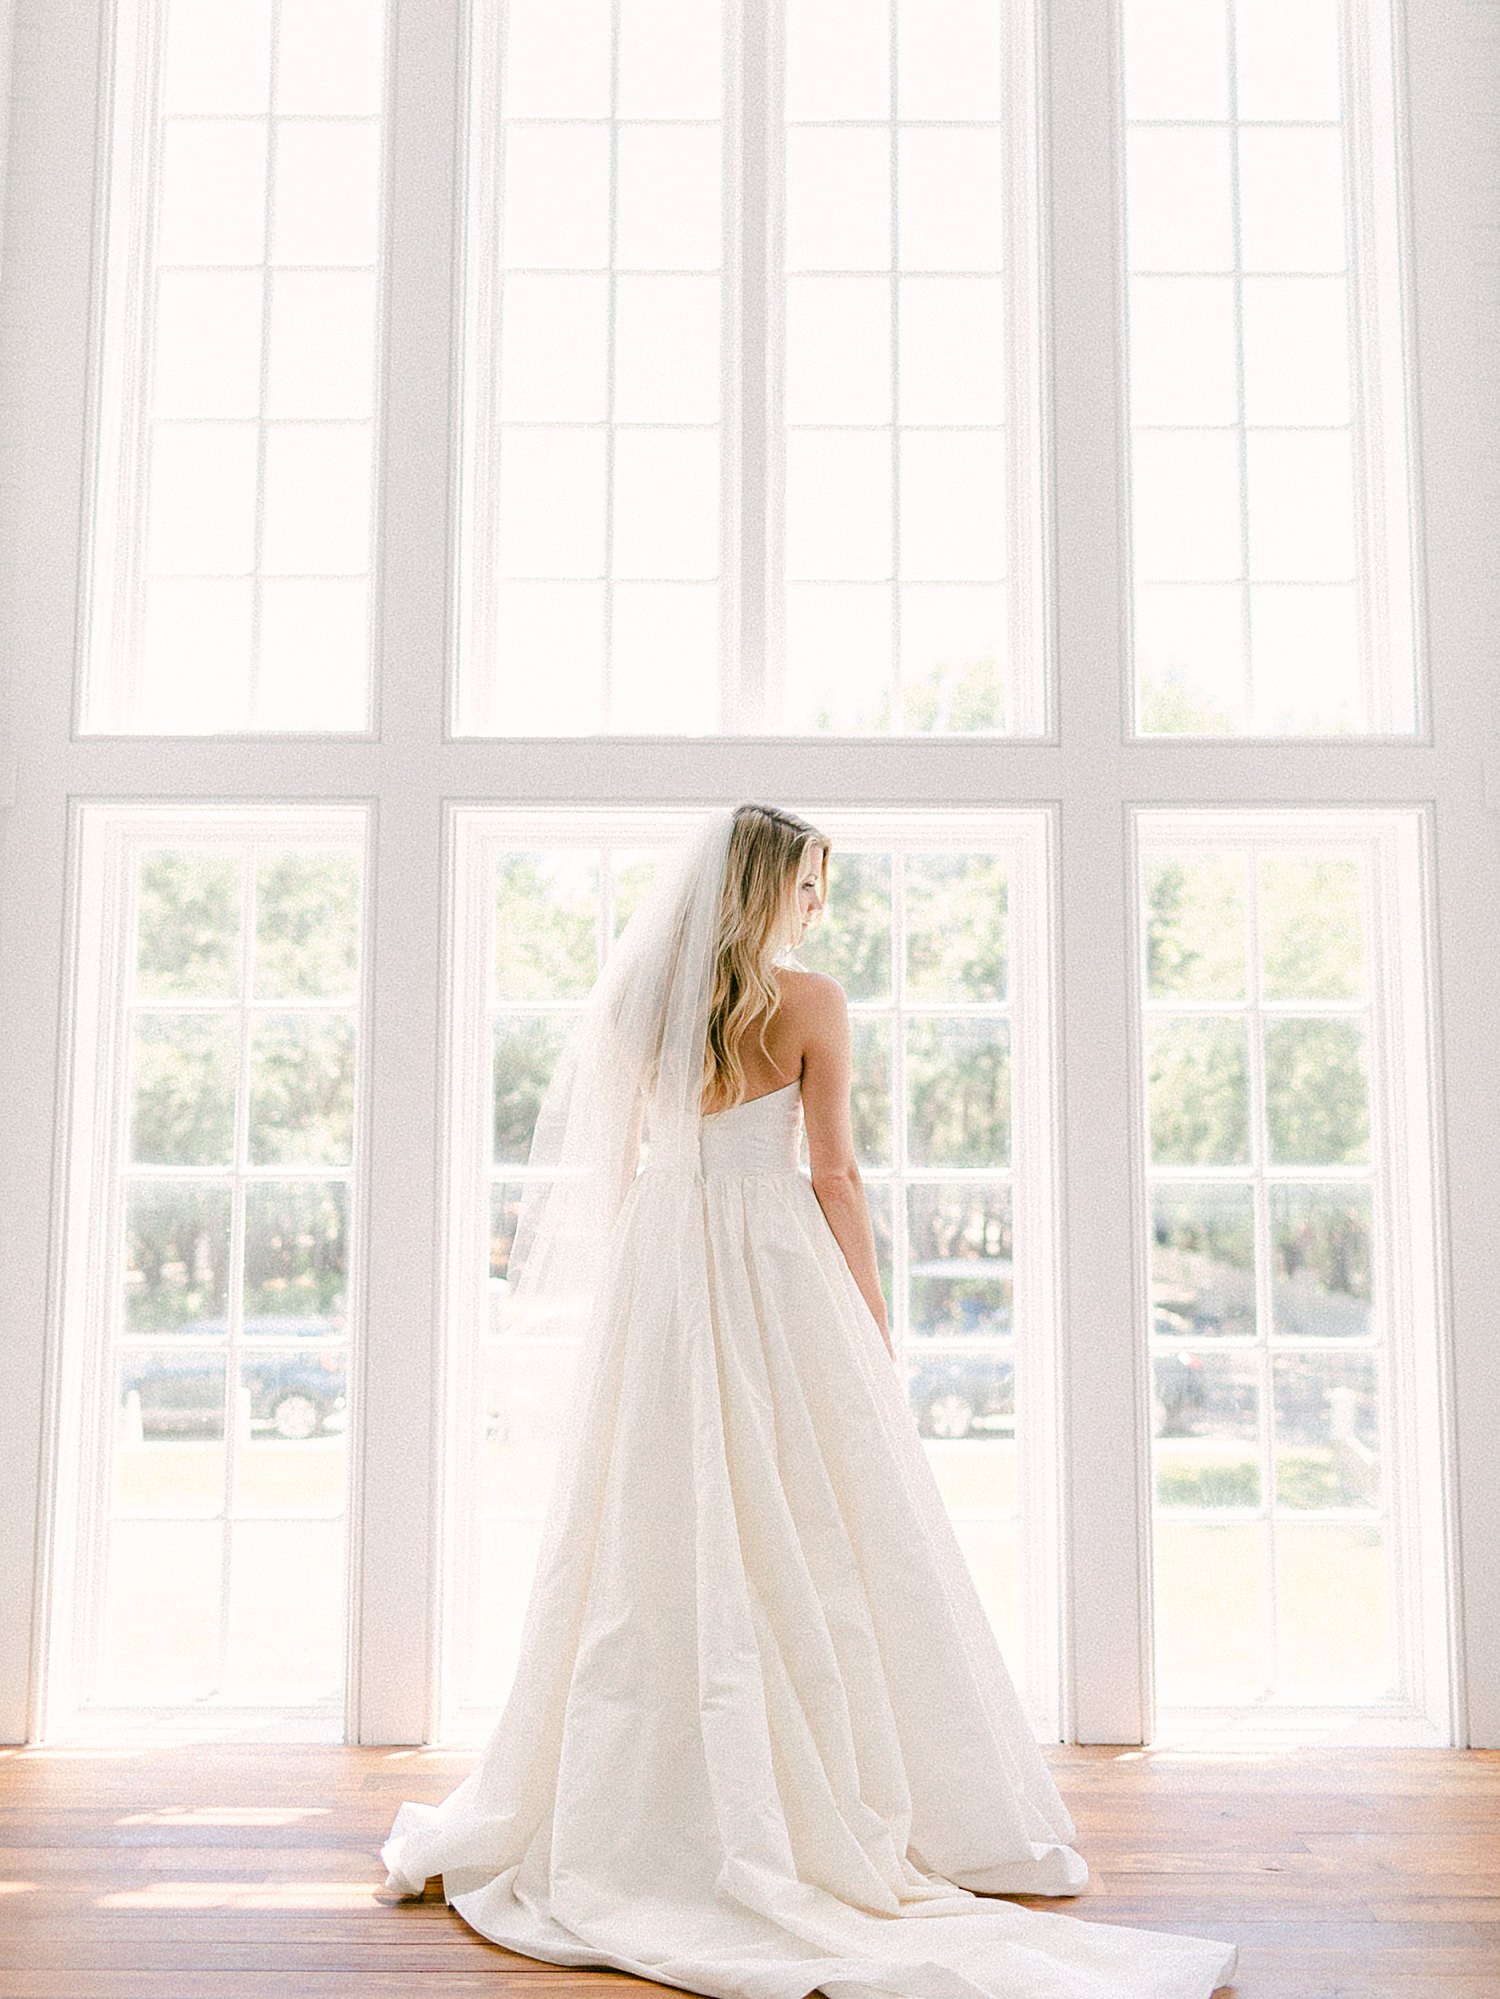 Bride in white wedding dress standing in front of large windows Seaside Chapel Florida